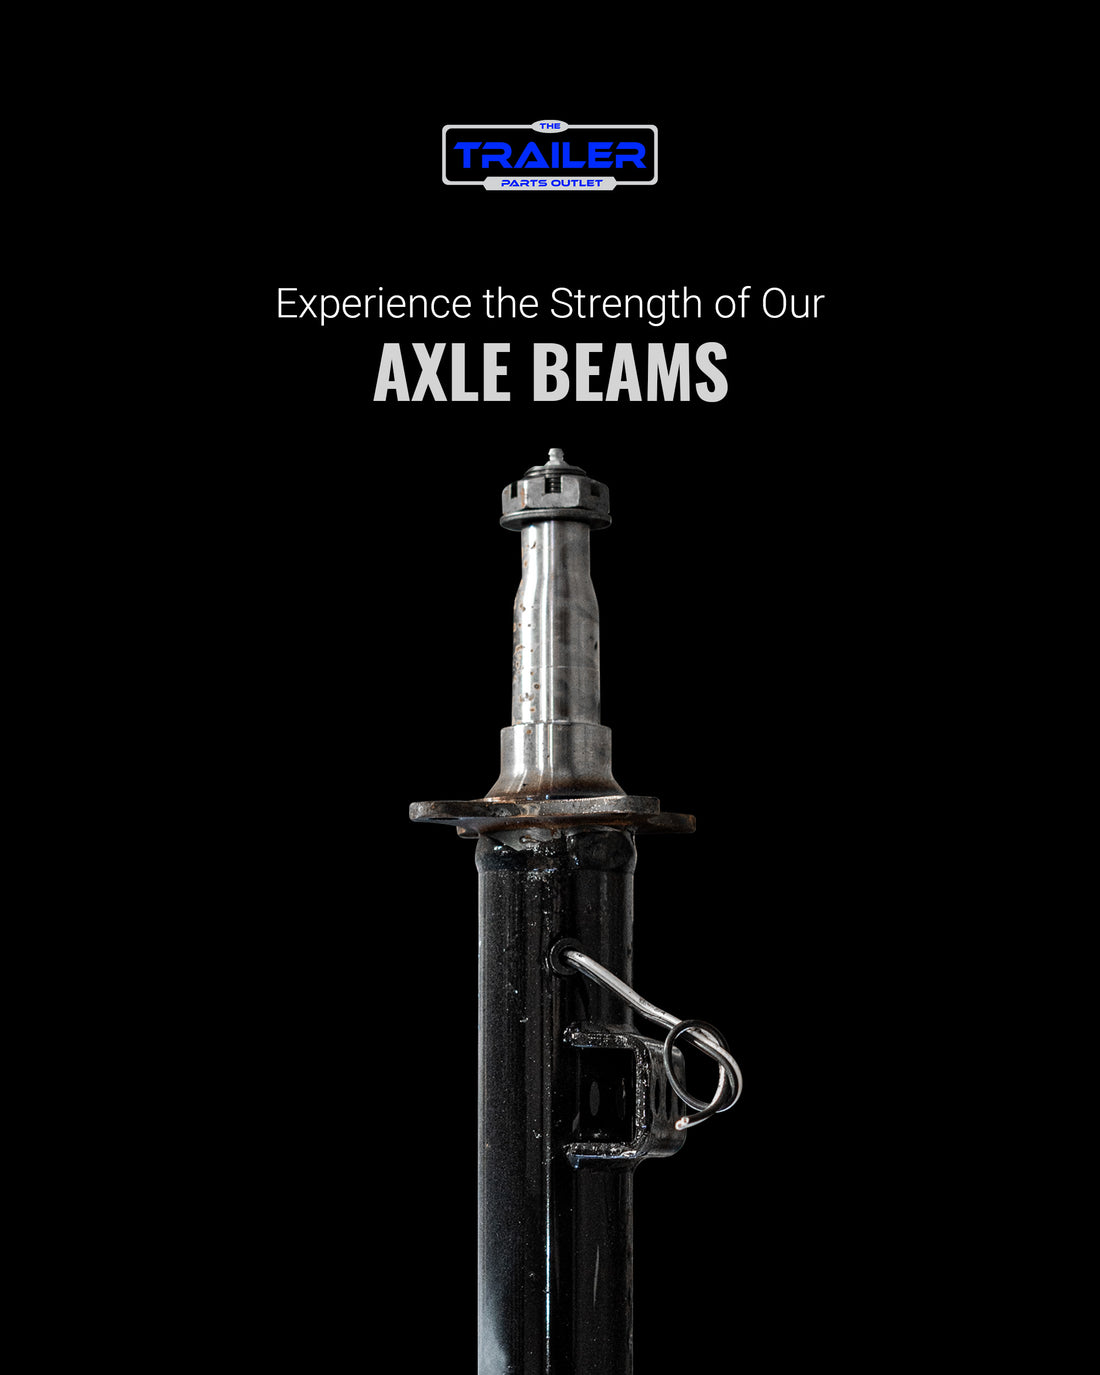 Top Quality Trailer Axle Beams from The Trailer Parts Outlet